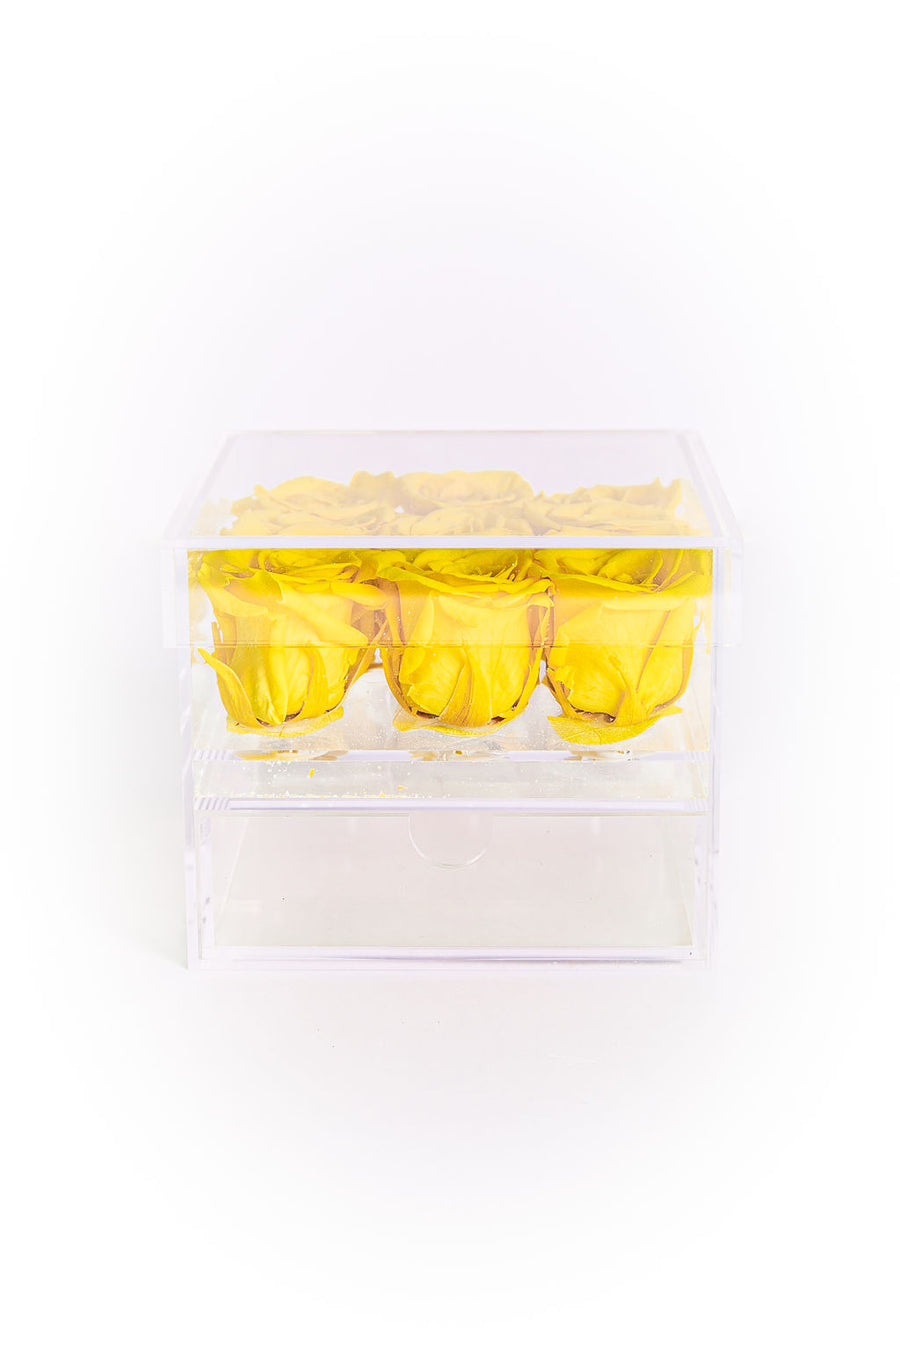 YELLOW NINE PRESERVED ROSES